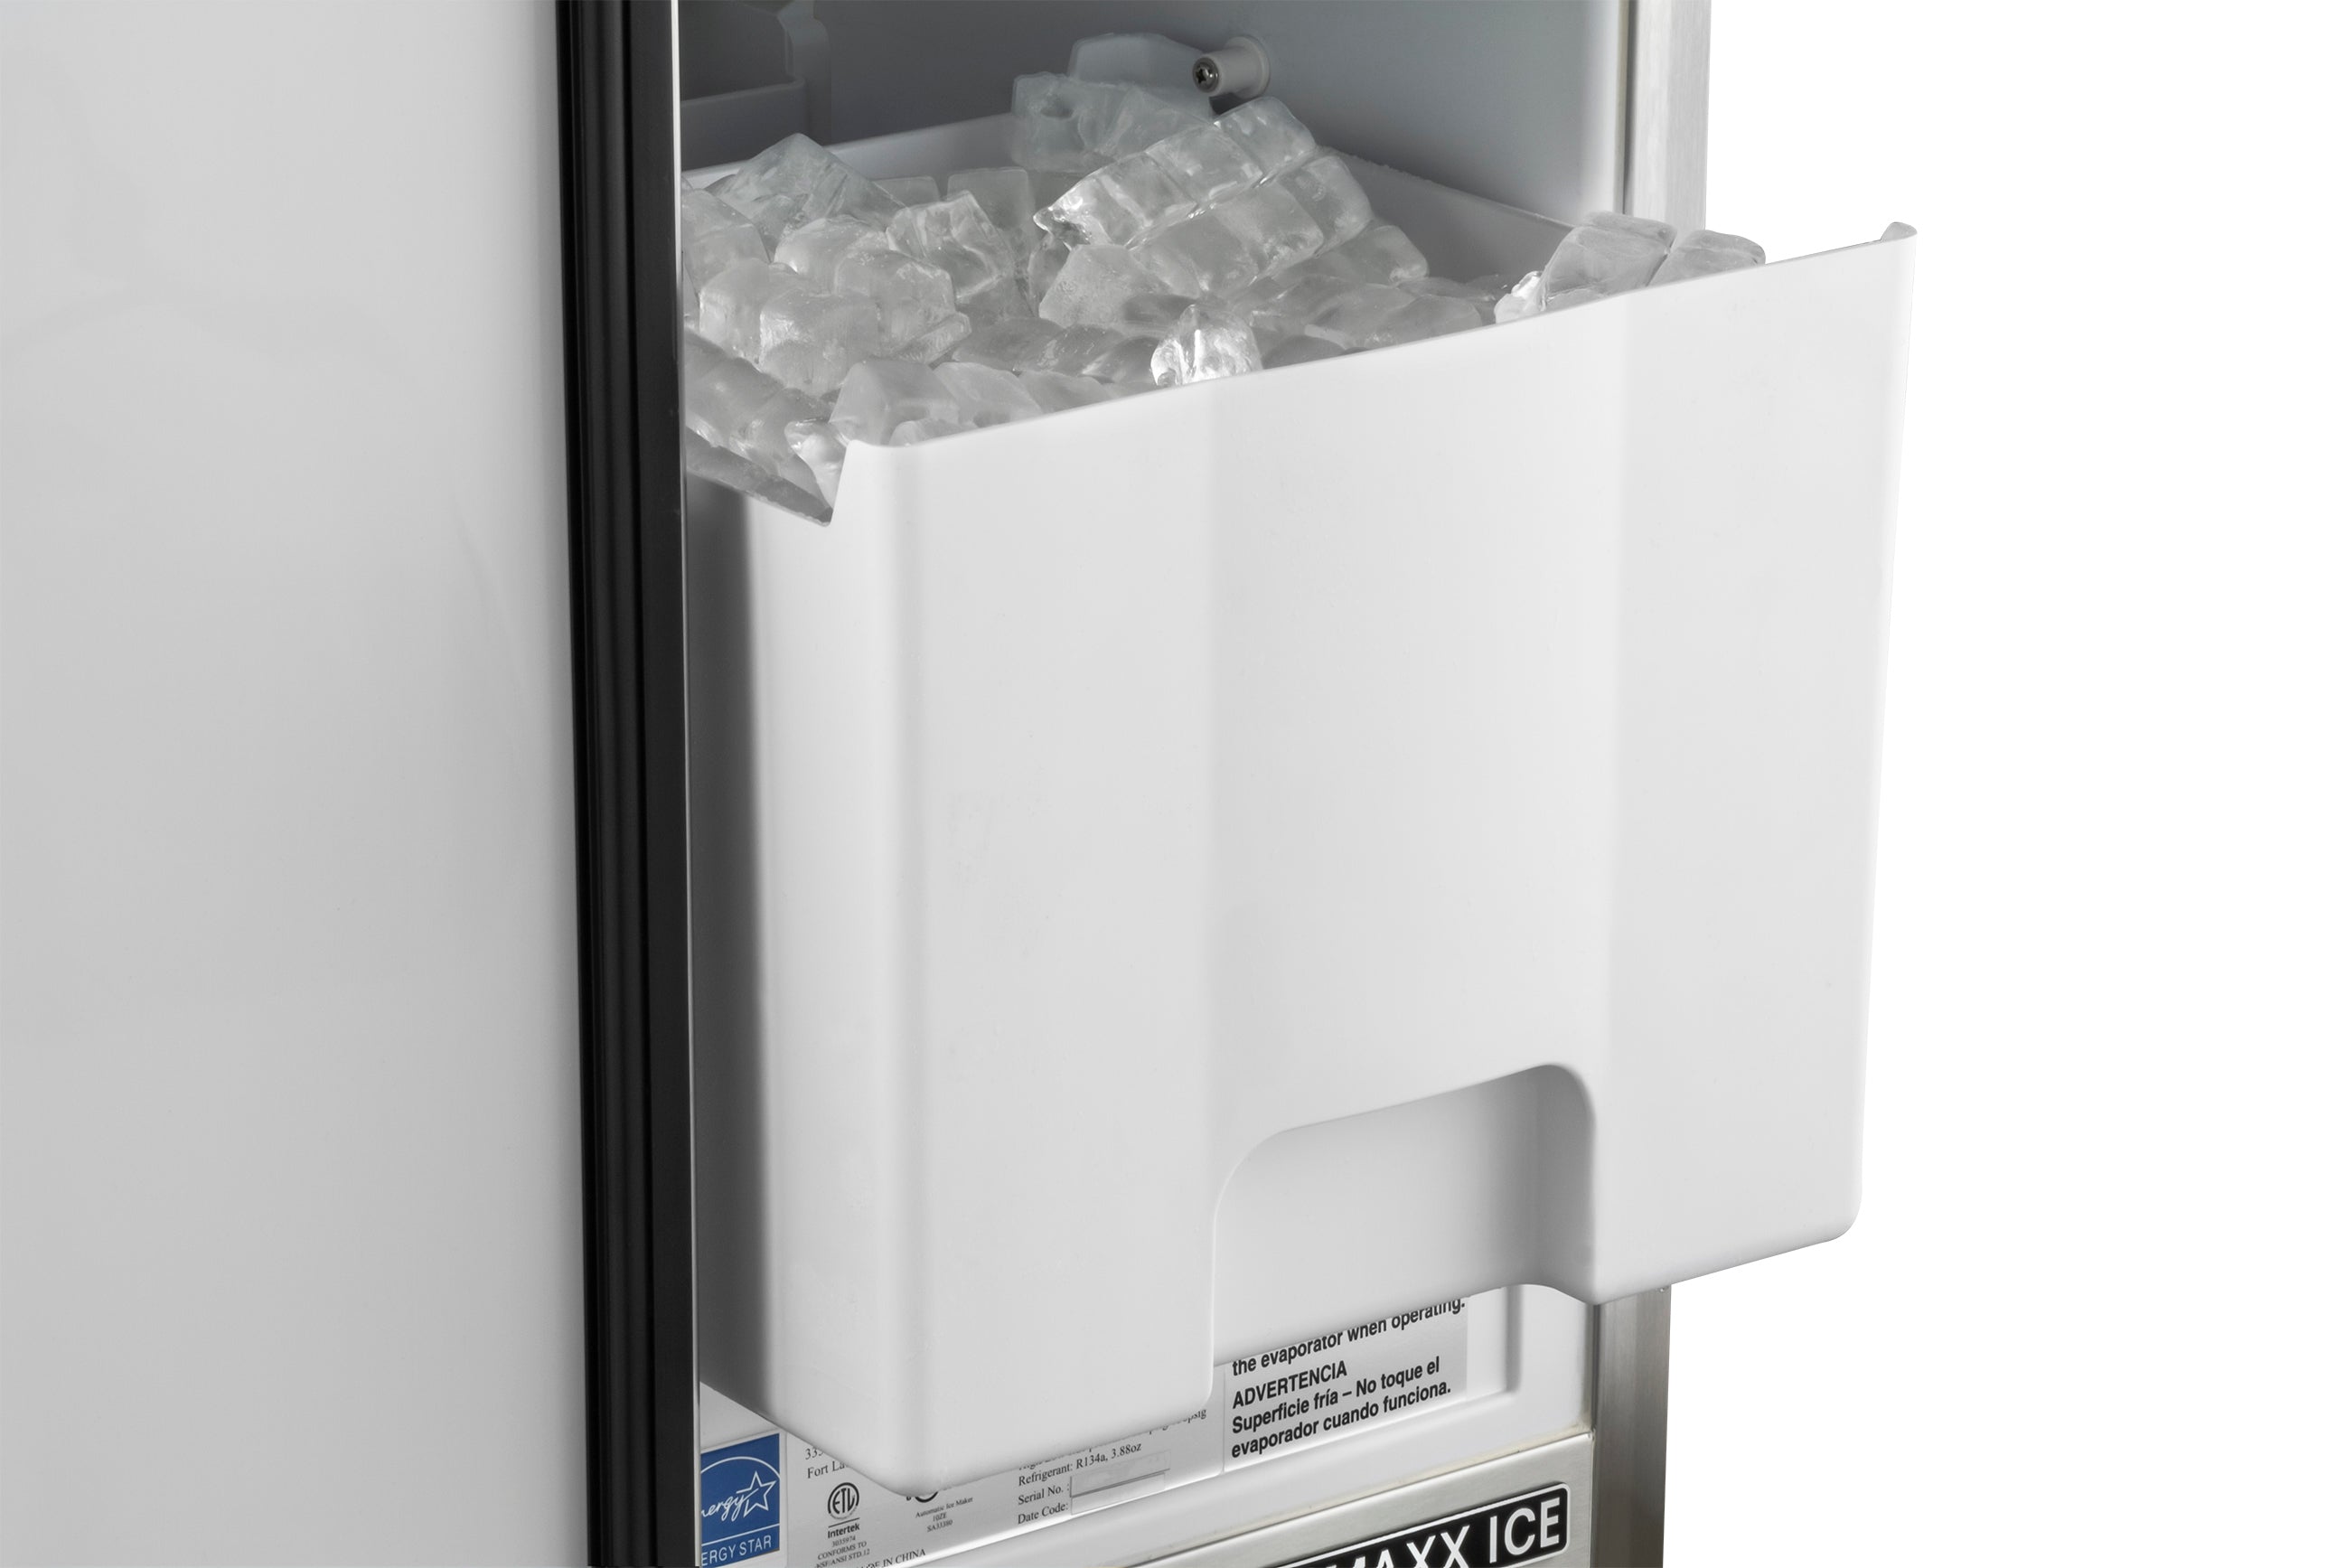 Maxx Ice Self-Contained Ice Machine, 260 lbs, Full Dice Ice Cubes